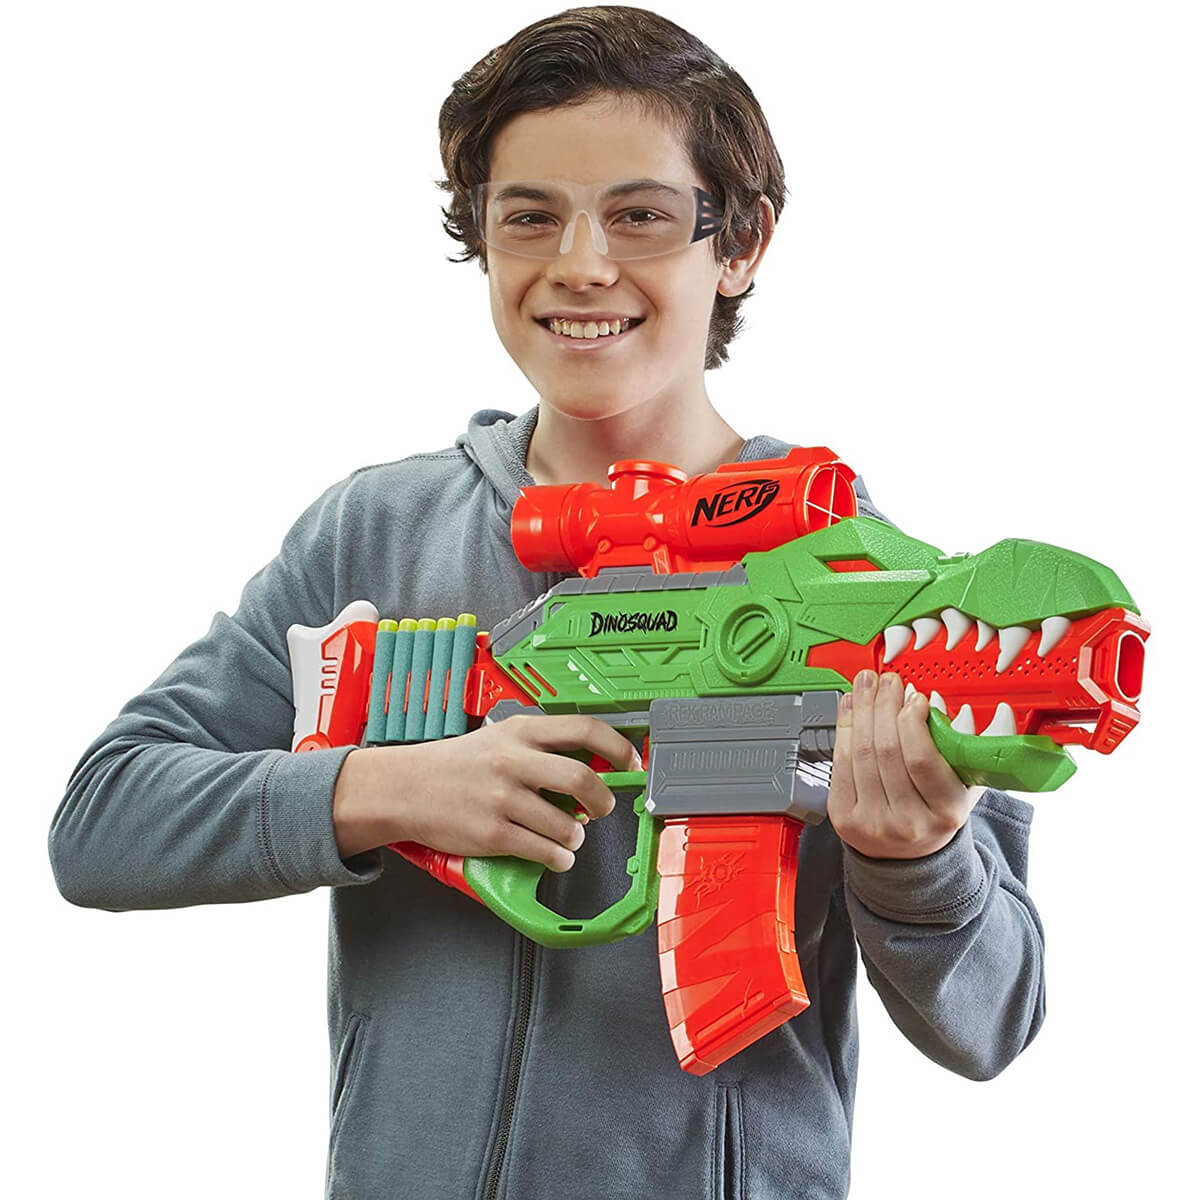 Exciting Nerf Toys for Children: Dinosaur Guns, Shooting Targets, and More!